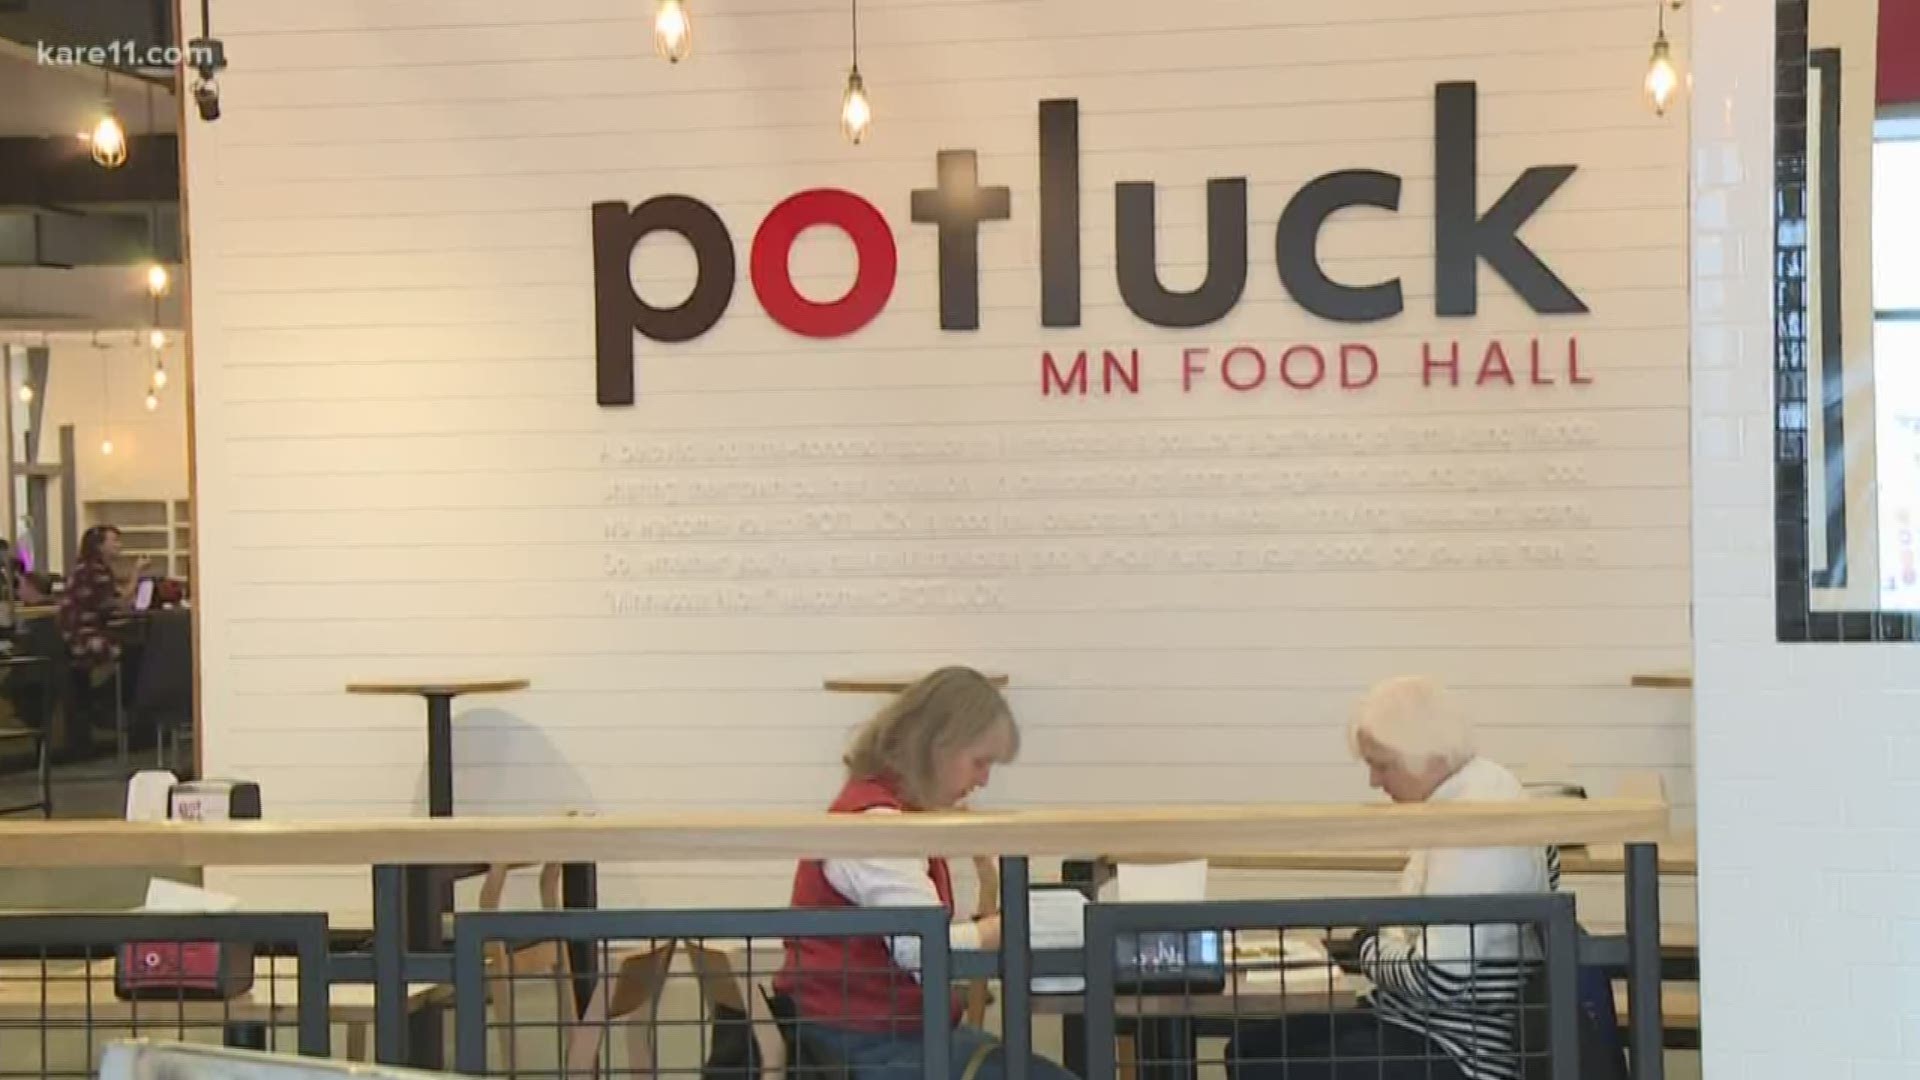 Potluck features a variety of delicious dishes from amazing Twin Cities chefs, all in one place!